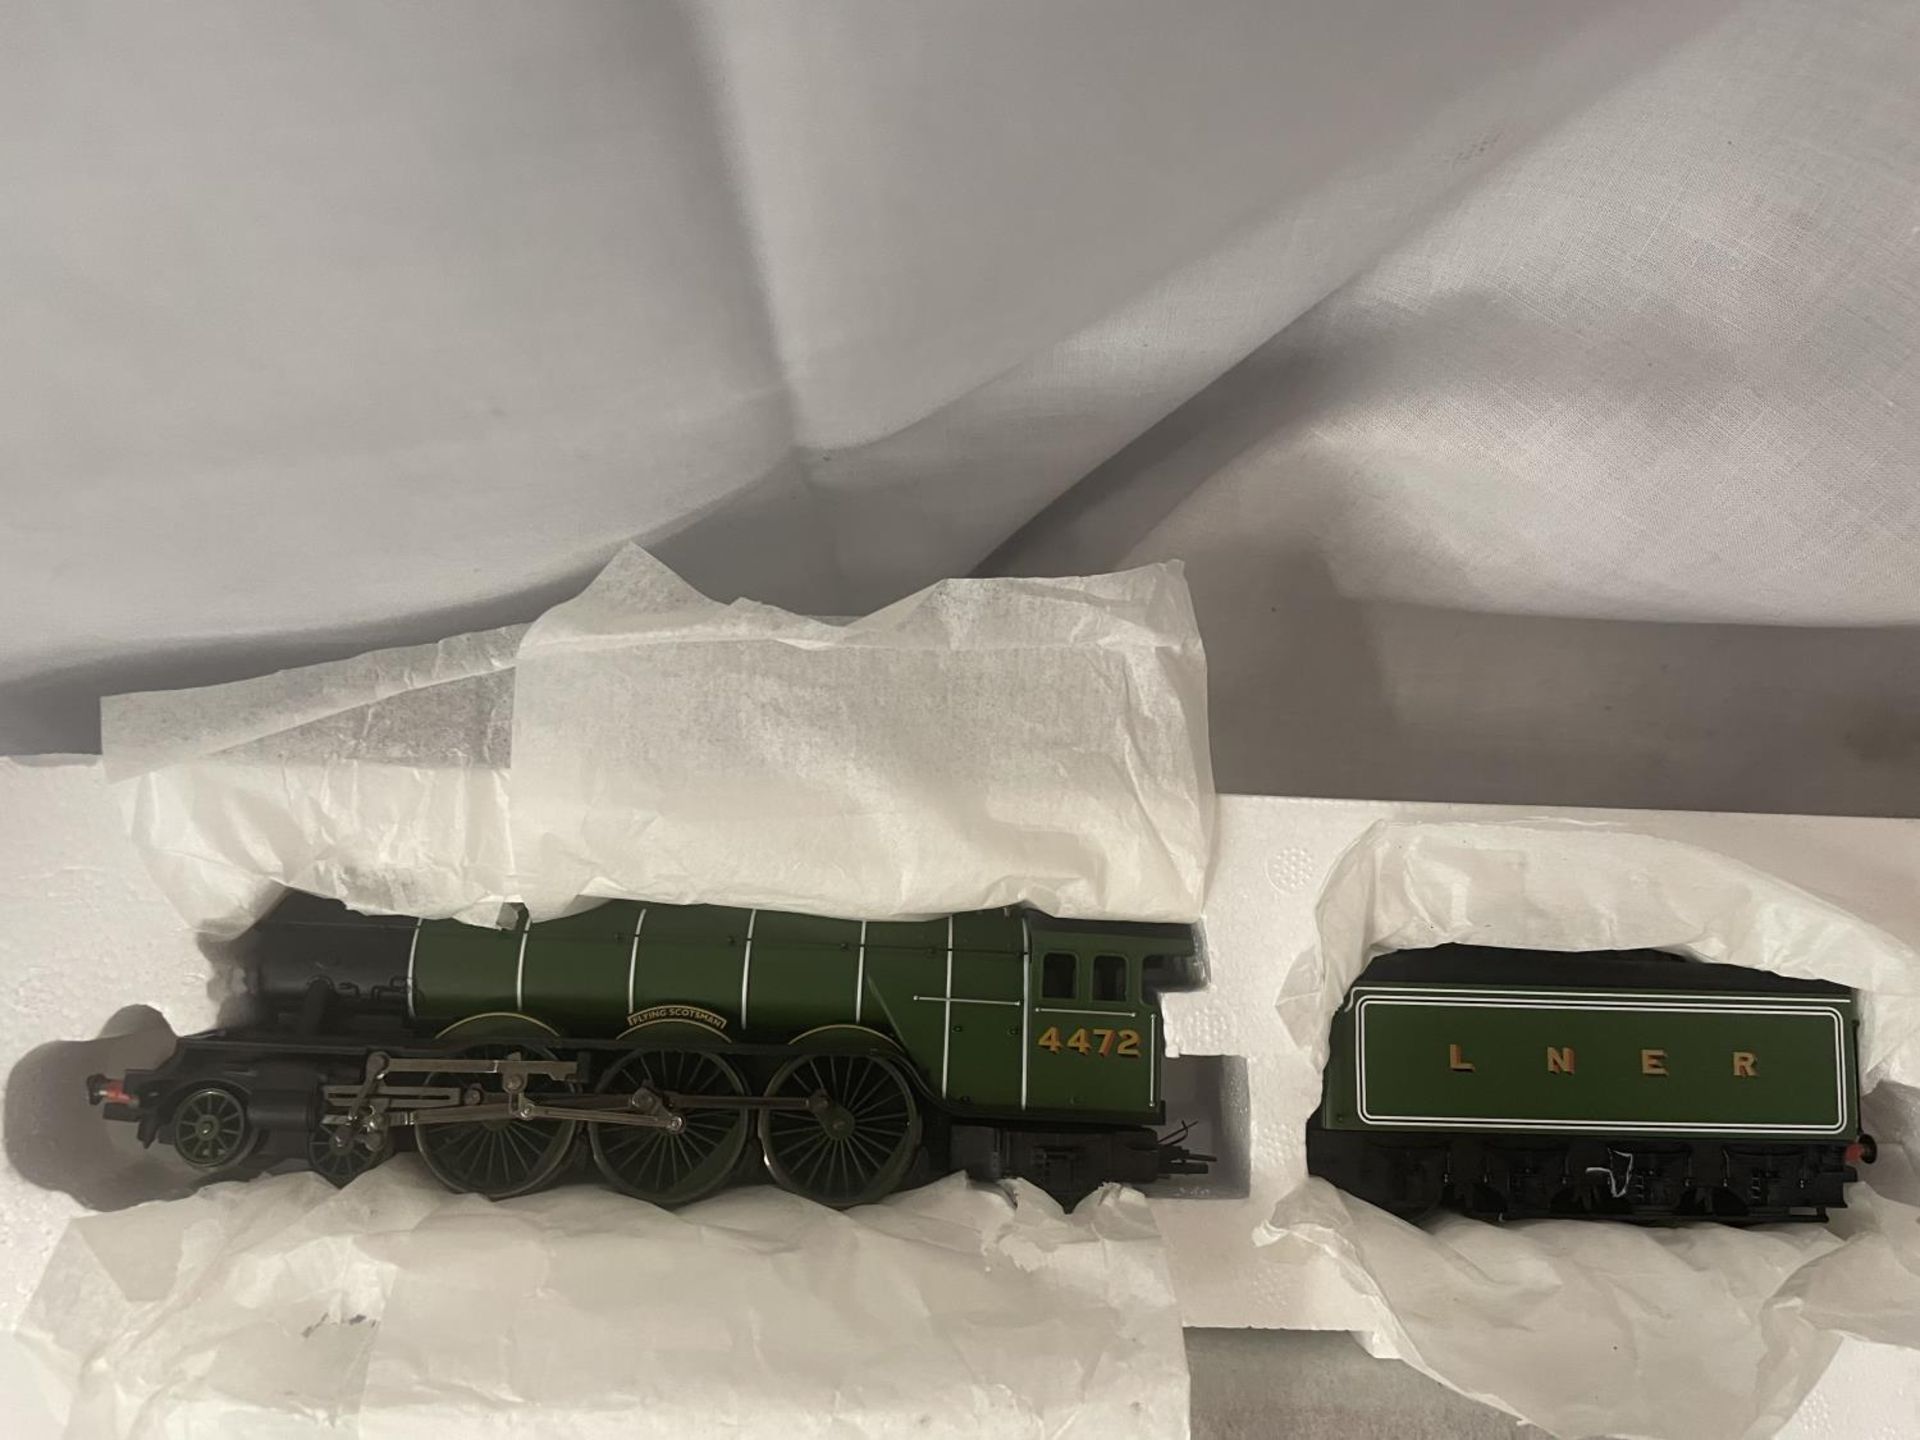 A BOXED HORNBY FLYING SCOTSMAN 00 GAUGE TRAIN SET (R1039) - AS NEW AND UNUSED WITH ITEMS IN THEIR - Image 3 of 7